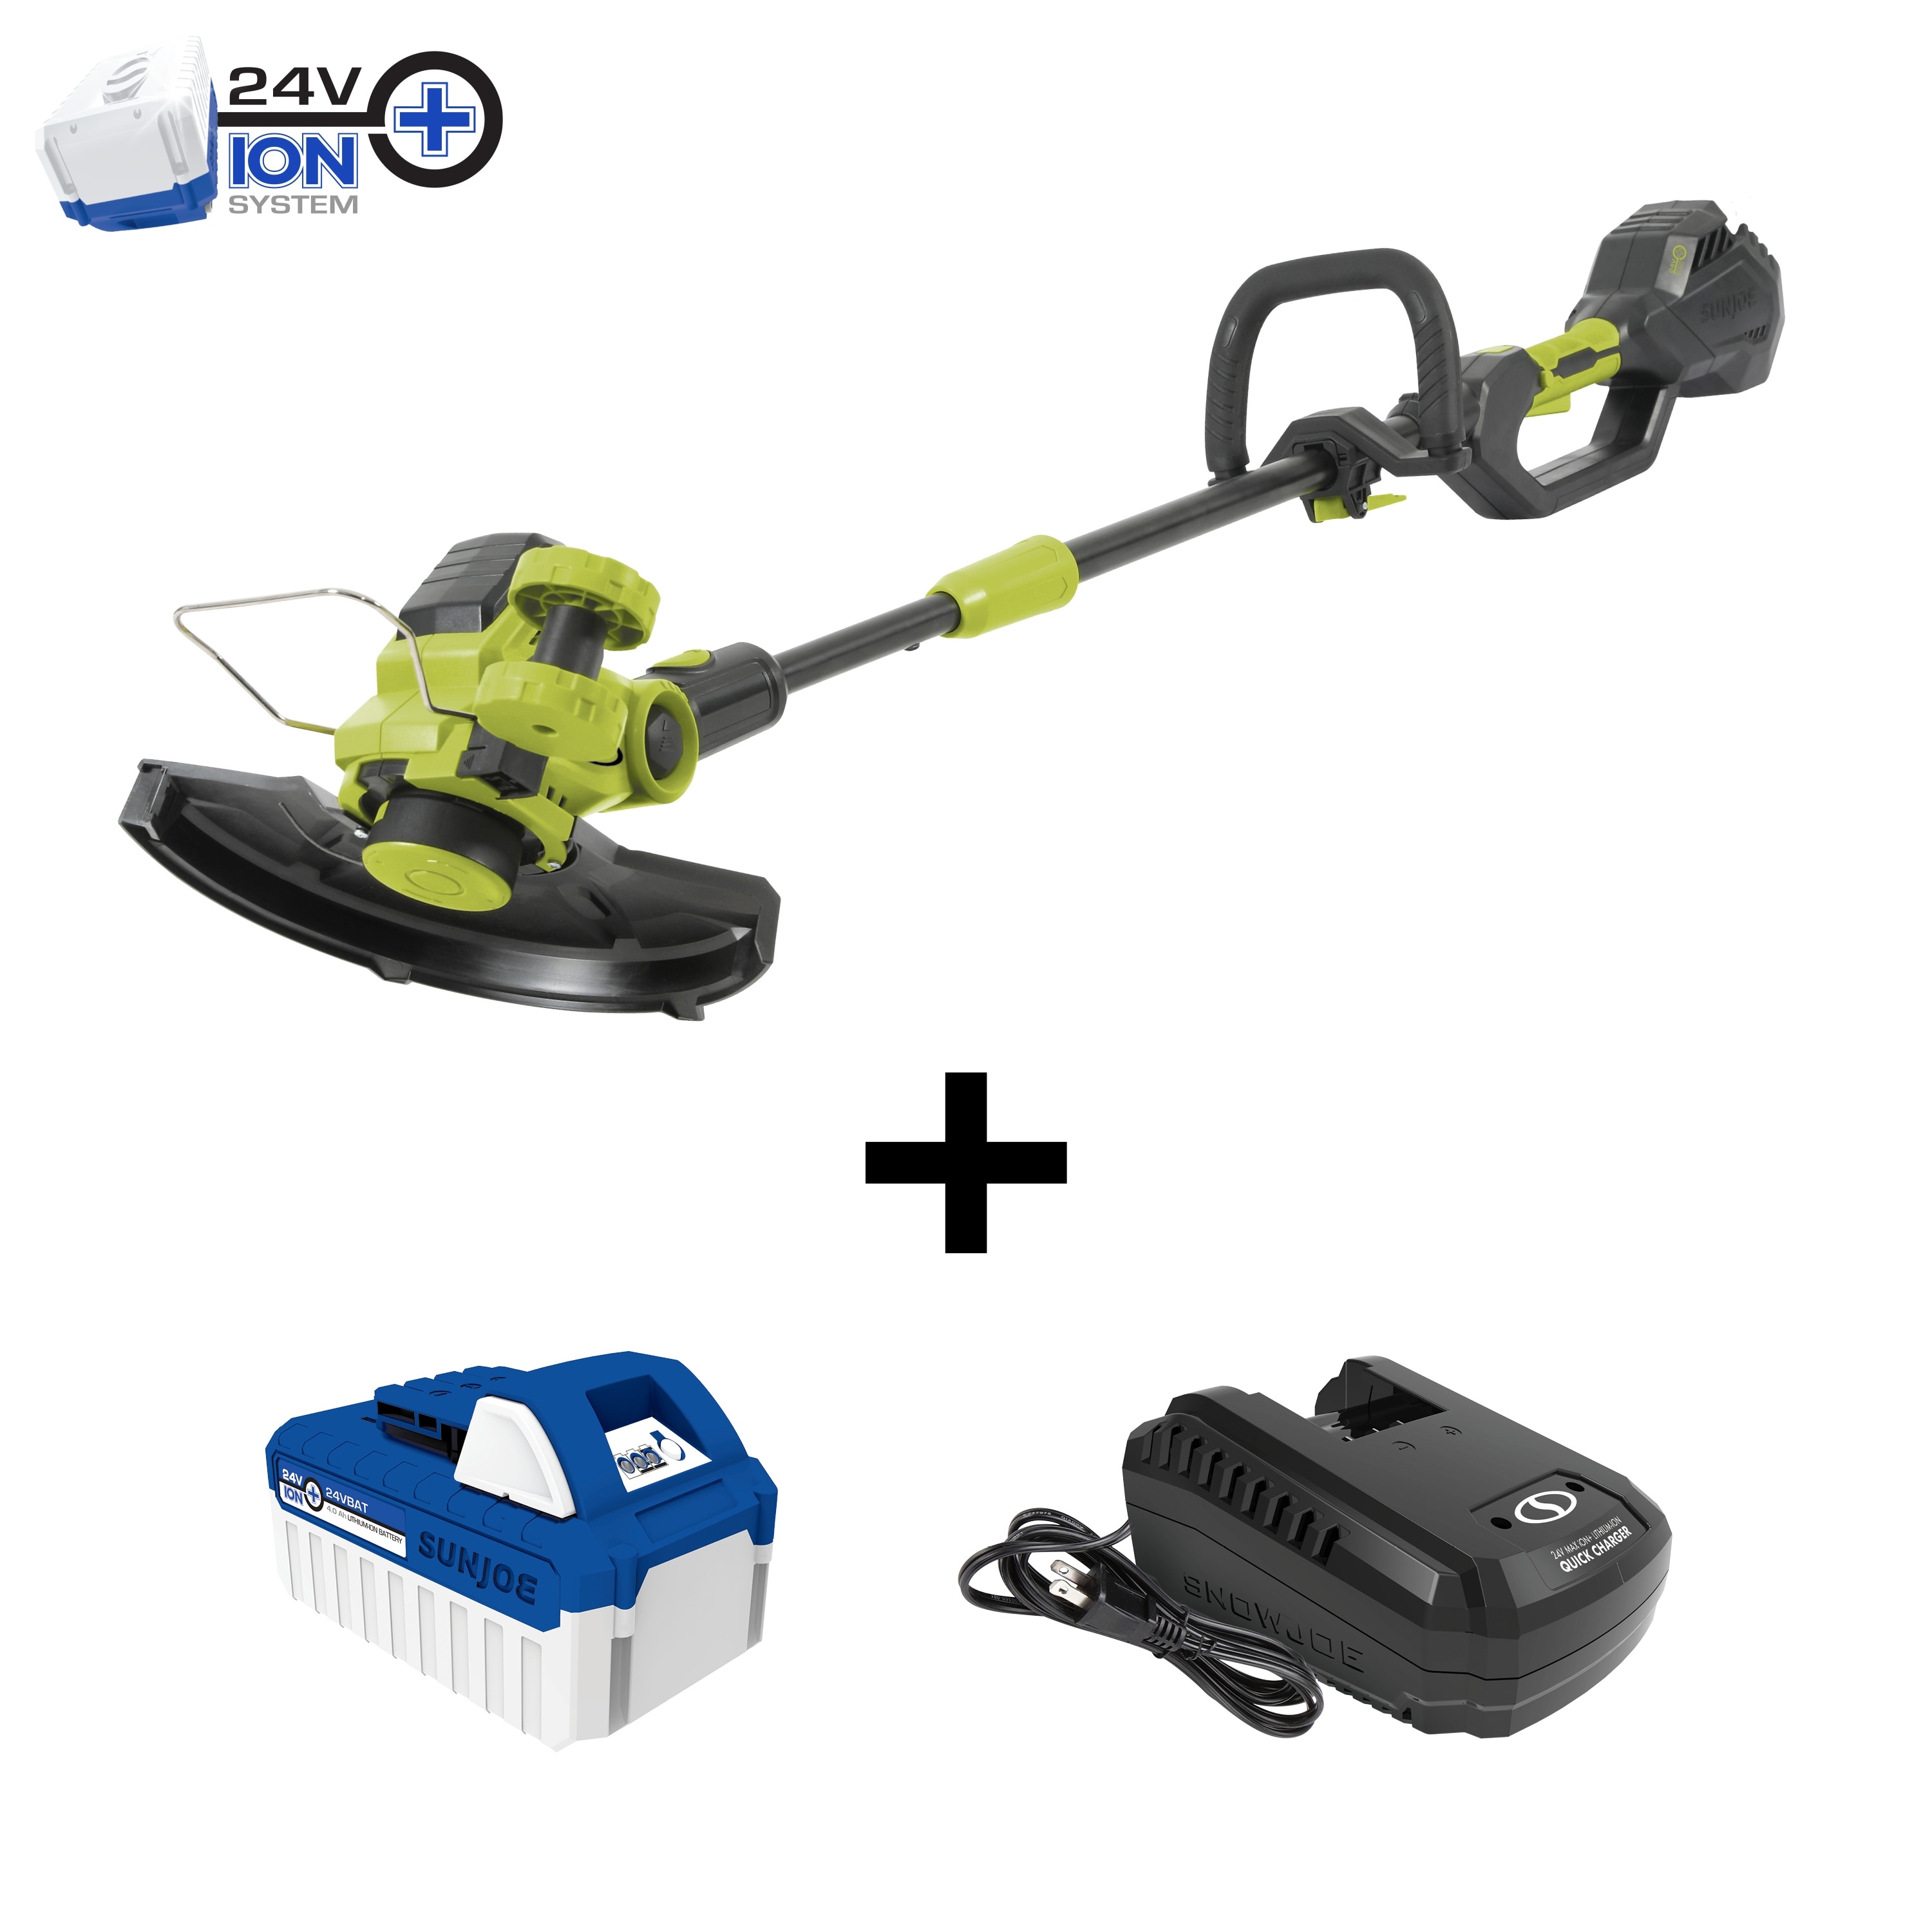 https://ak1.ostkcdn.com/images/products/is/images/direct/fc01caa5fc6214833e31c2facbf3569d31e95249/24V-12in-Dual-Line-String-Trimmer-Edger-Kit-w-4.0-Ah-Battery-and-Rapid-Charger.jpg